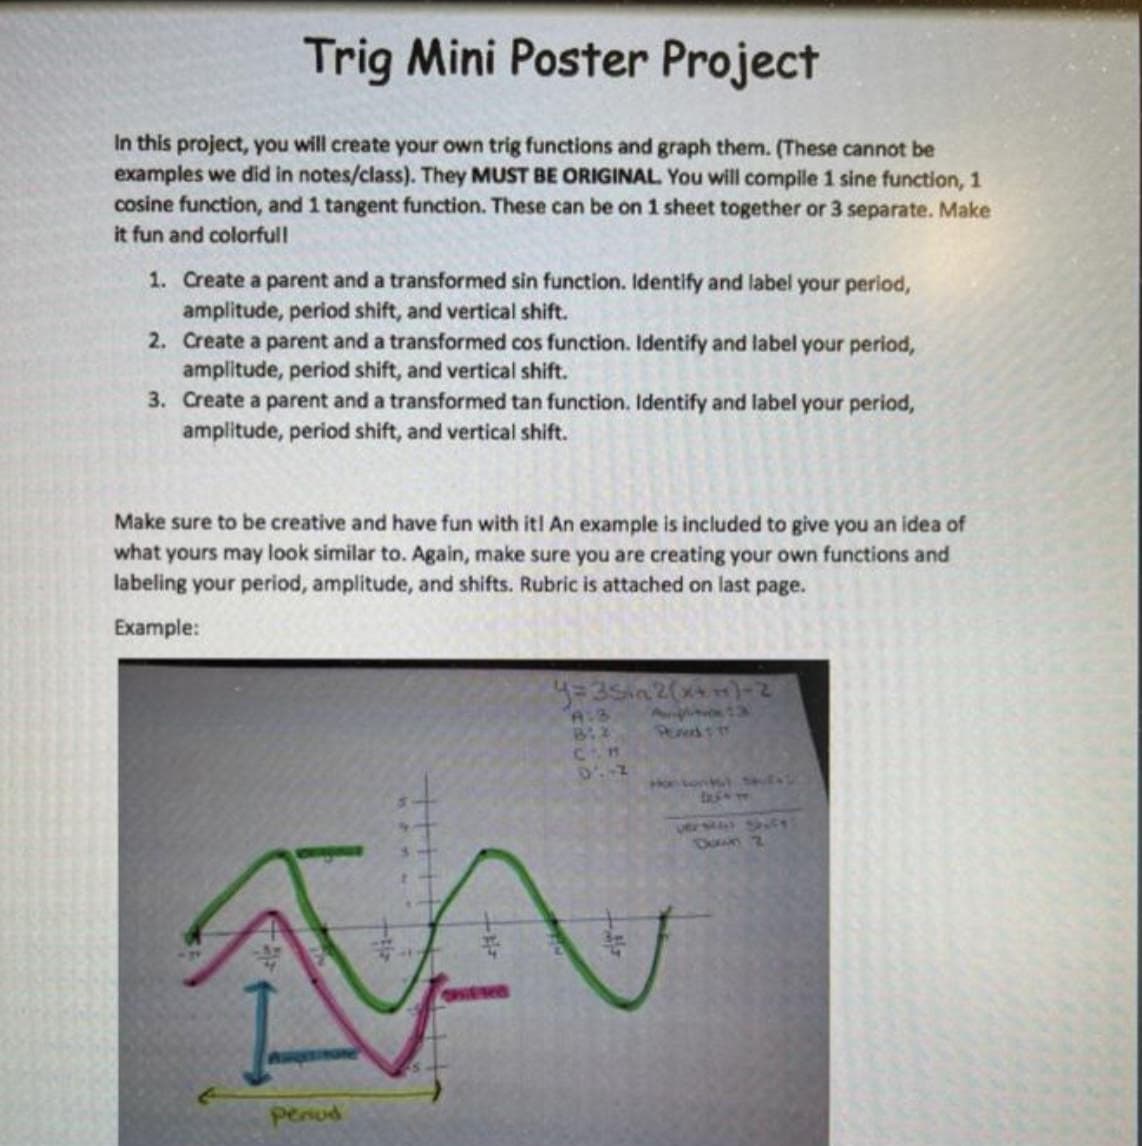 Trig Mini Poster Project
In this project, you will create your own trig functions and graph them. (These cannot be
examples we did in notes/class). They MUST BE ORIGINAL You will compile 1 sine function, 1
cosine function, and 1 tangent function. These can be on 1 sheet together or 3 separate. Make
it fun and colorfull
1. Create a parent and a transformed sin function. Identify and label your period,
amplitude, period shift, and vertical shift.
2. Create a parent and a transformed cos function. Identify and label your period,
amplitude, period shift, and vertical shift.
3. Create a parent and a transformed tan function. Identify and label your period,
amplitude, period shift, and vertical shift.
Make sure to be creative and have fun with it! An example is included to give you an idea of
what yours may look similar to. Again, make sure you are creating your own functions and
labeling your period, amplitude, and shifts. Rubric is attached on last page.
Example:
A:3
Con
Down 2
OHE
penud
